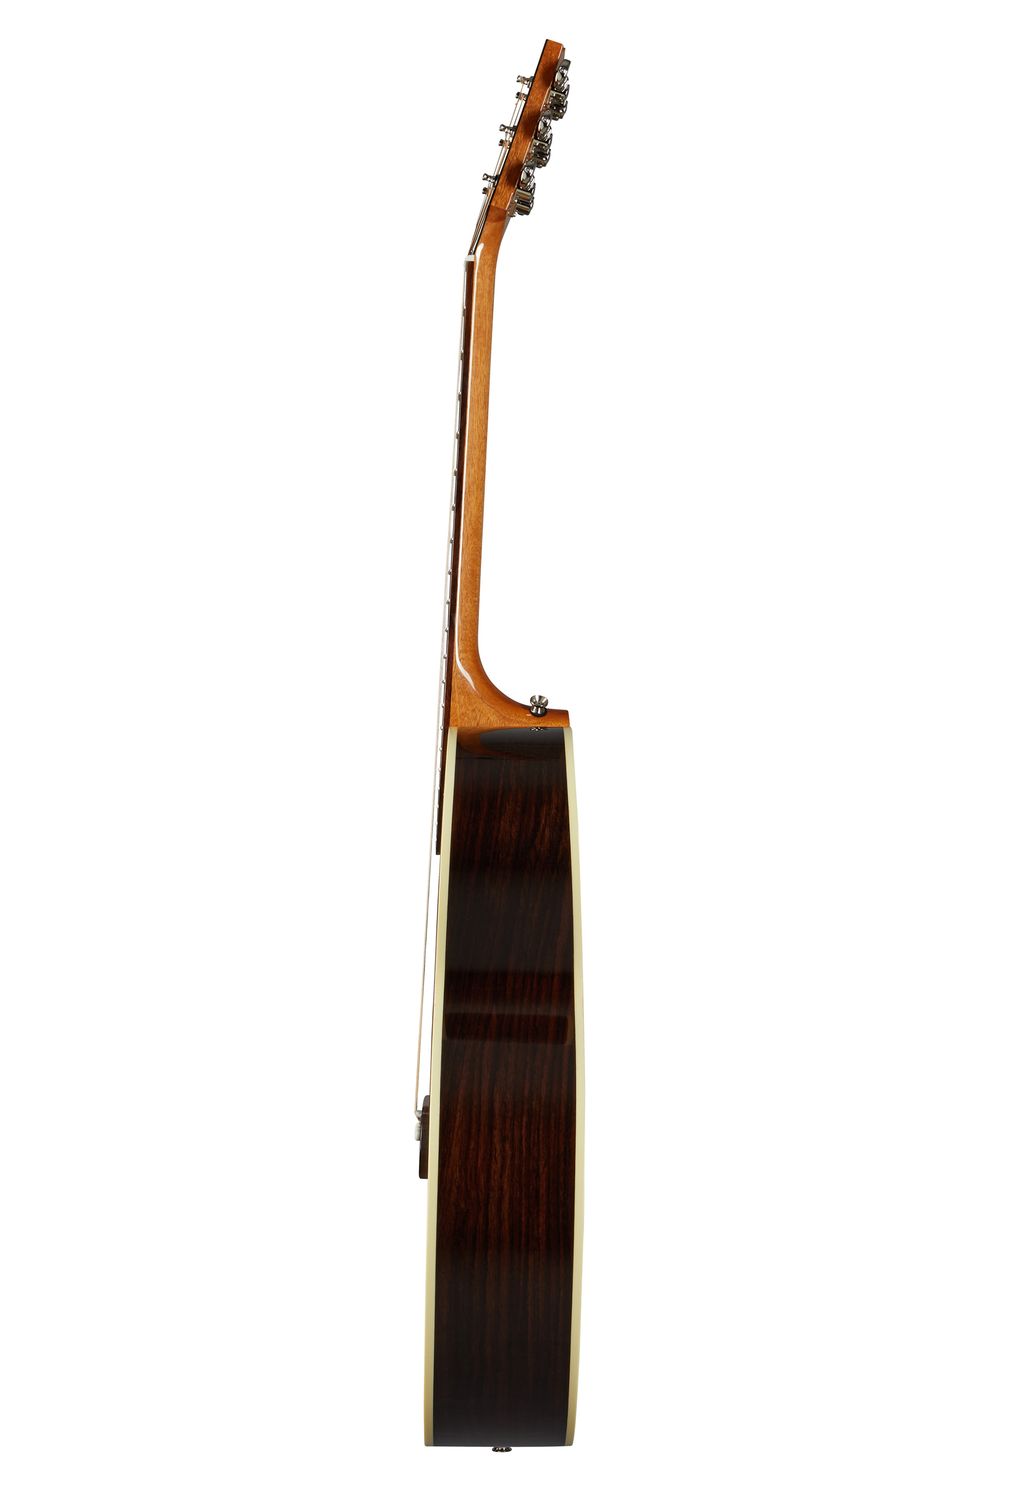 __static.gibson.com_product-images_Acoustic_ACCIBN653_Antique_Natural_MCJB2SRWAN_side